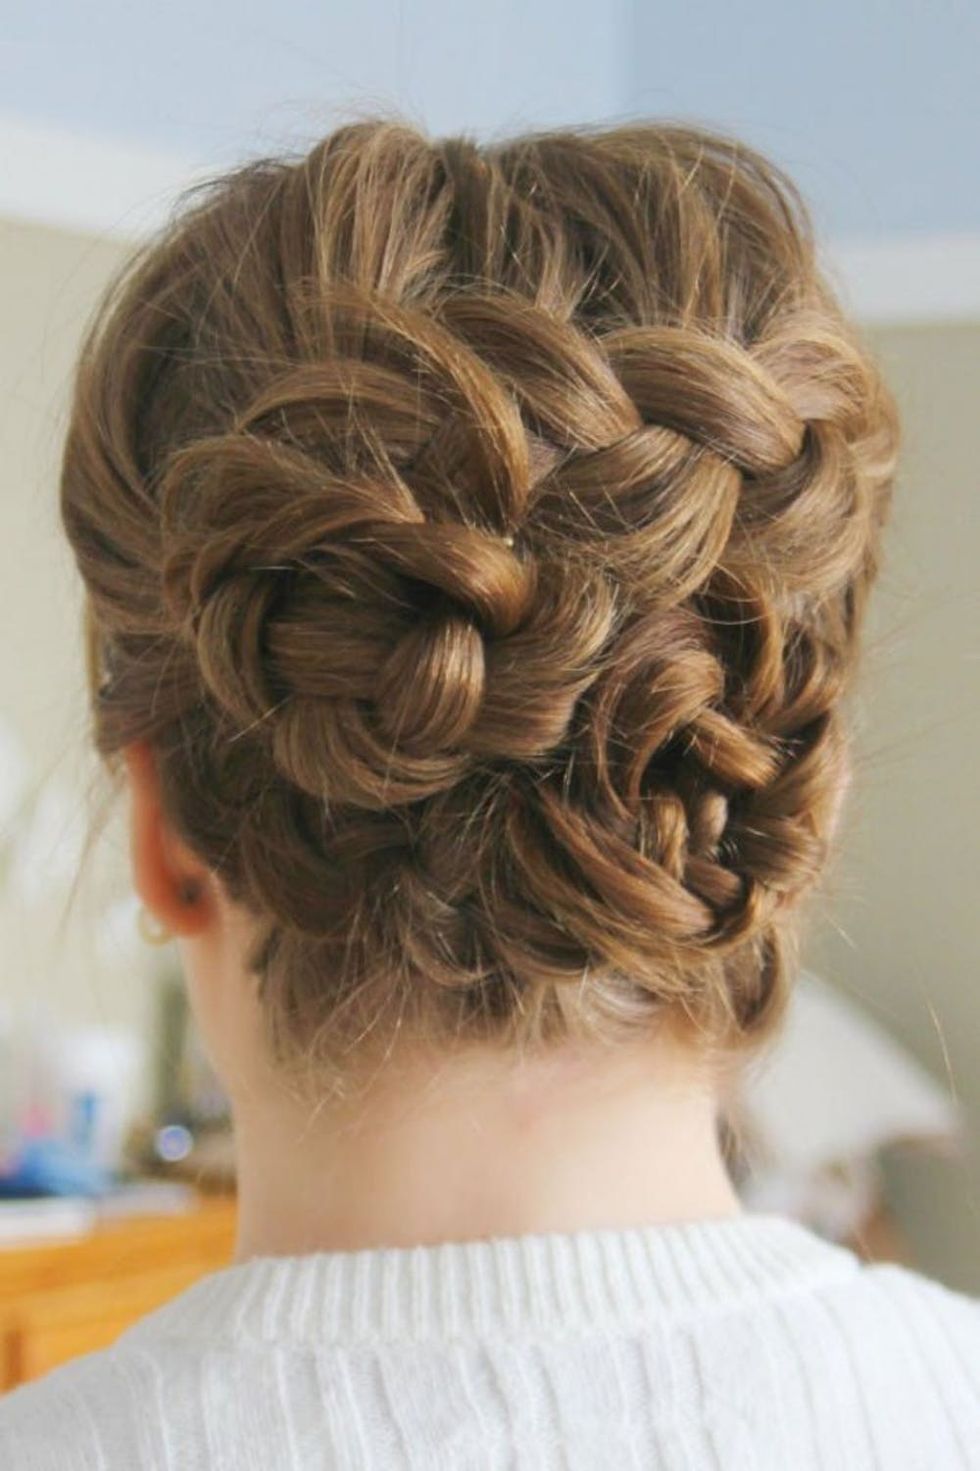 14 Pretty Chignons That Will Make Your Easter Sunday Outfit - Brit + Co